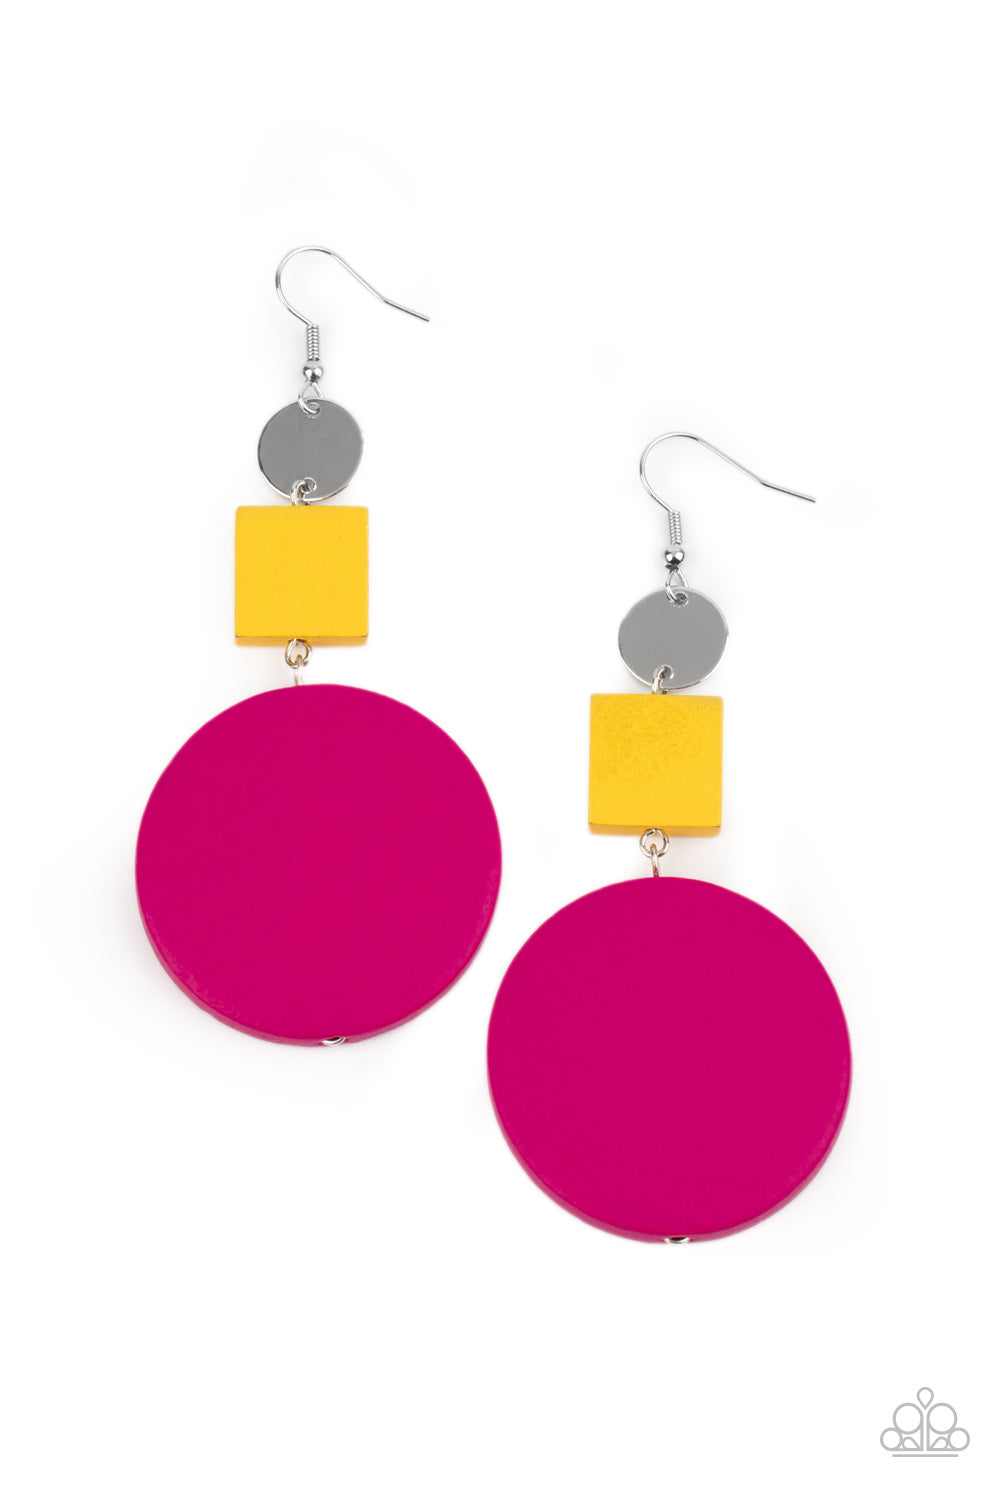 ​Modern Materials - Multi Color ( Pink and Yellow) Wood Earrings - Paparazzi Accessories -A shiny silver disc, yellow wooden square, and oversized pink wooden circle delicately link into a colorfully retro lure for a trendsetting finish. Earring attaches to a standard fishhook fitting. Sold as one pair of earrings.